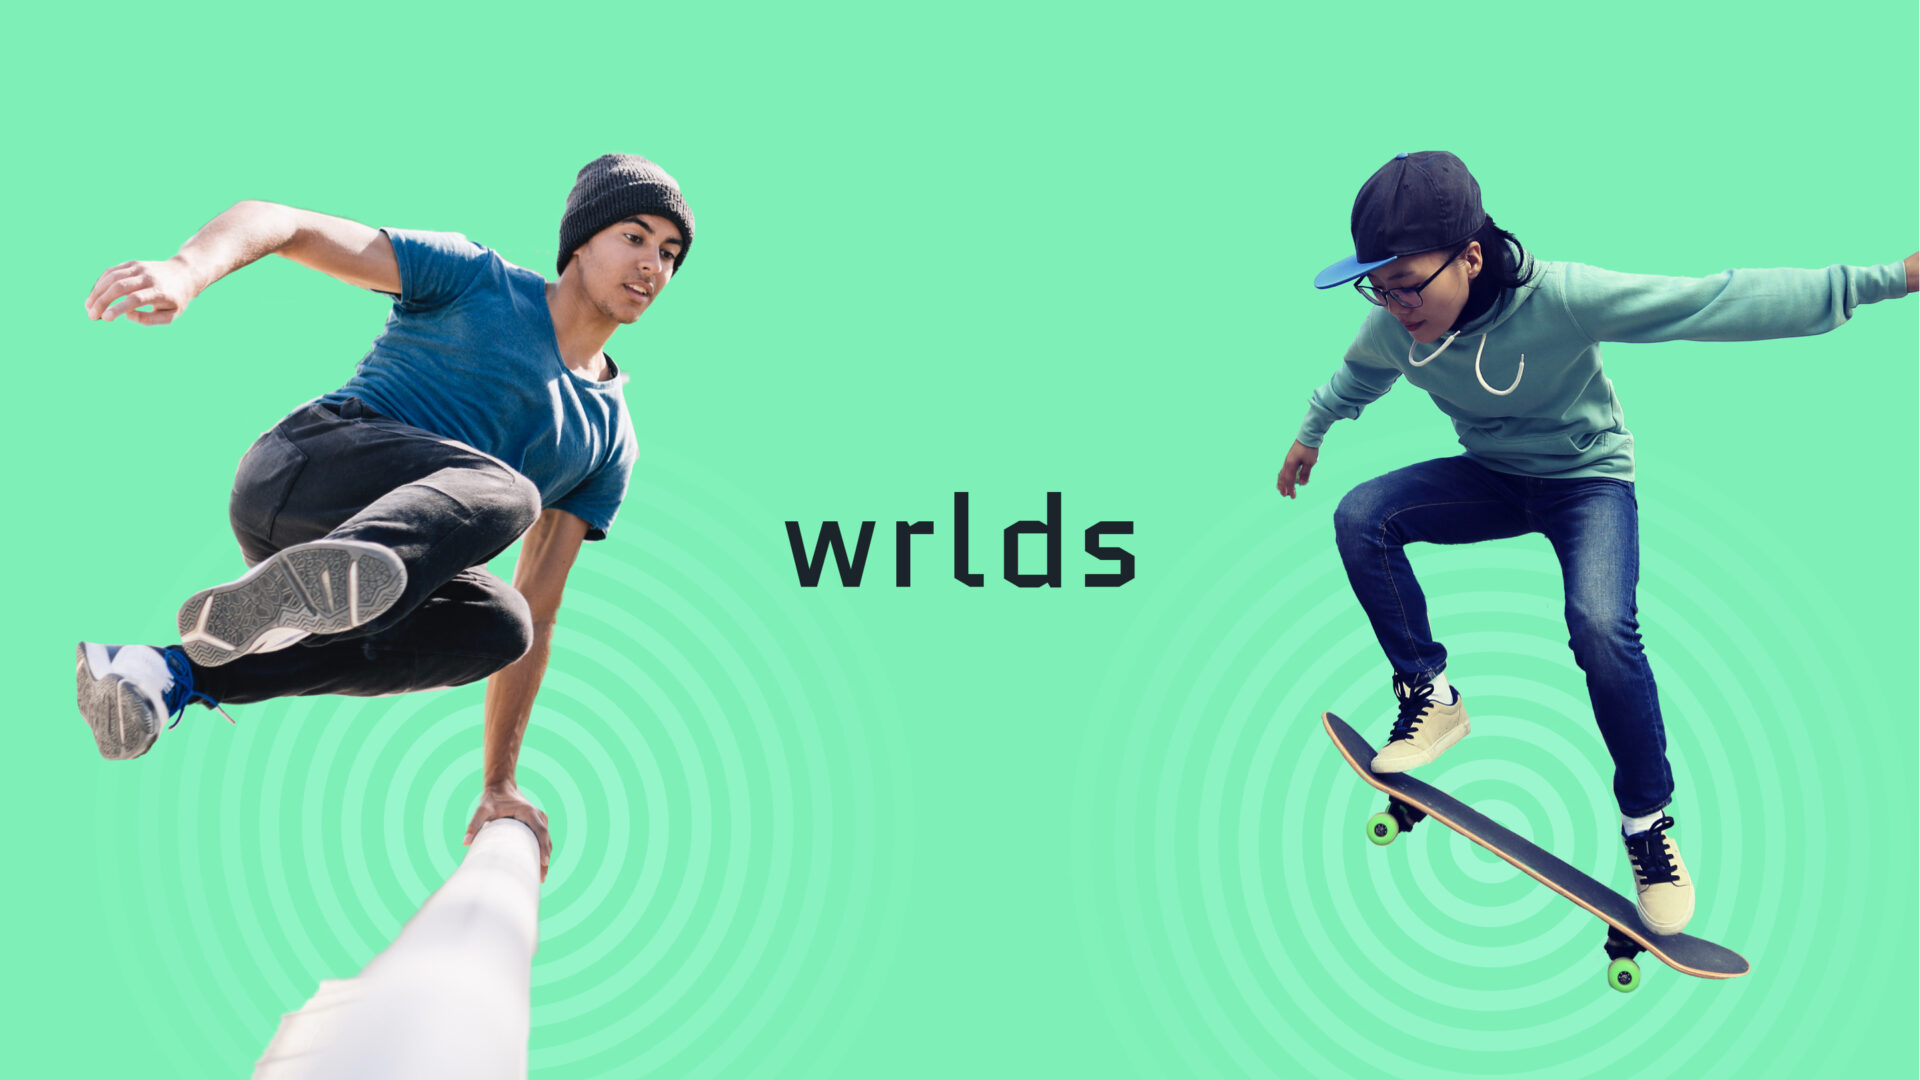 Wrlds helps world class brands to make smart, connected, ‘digi-physical’ products